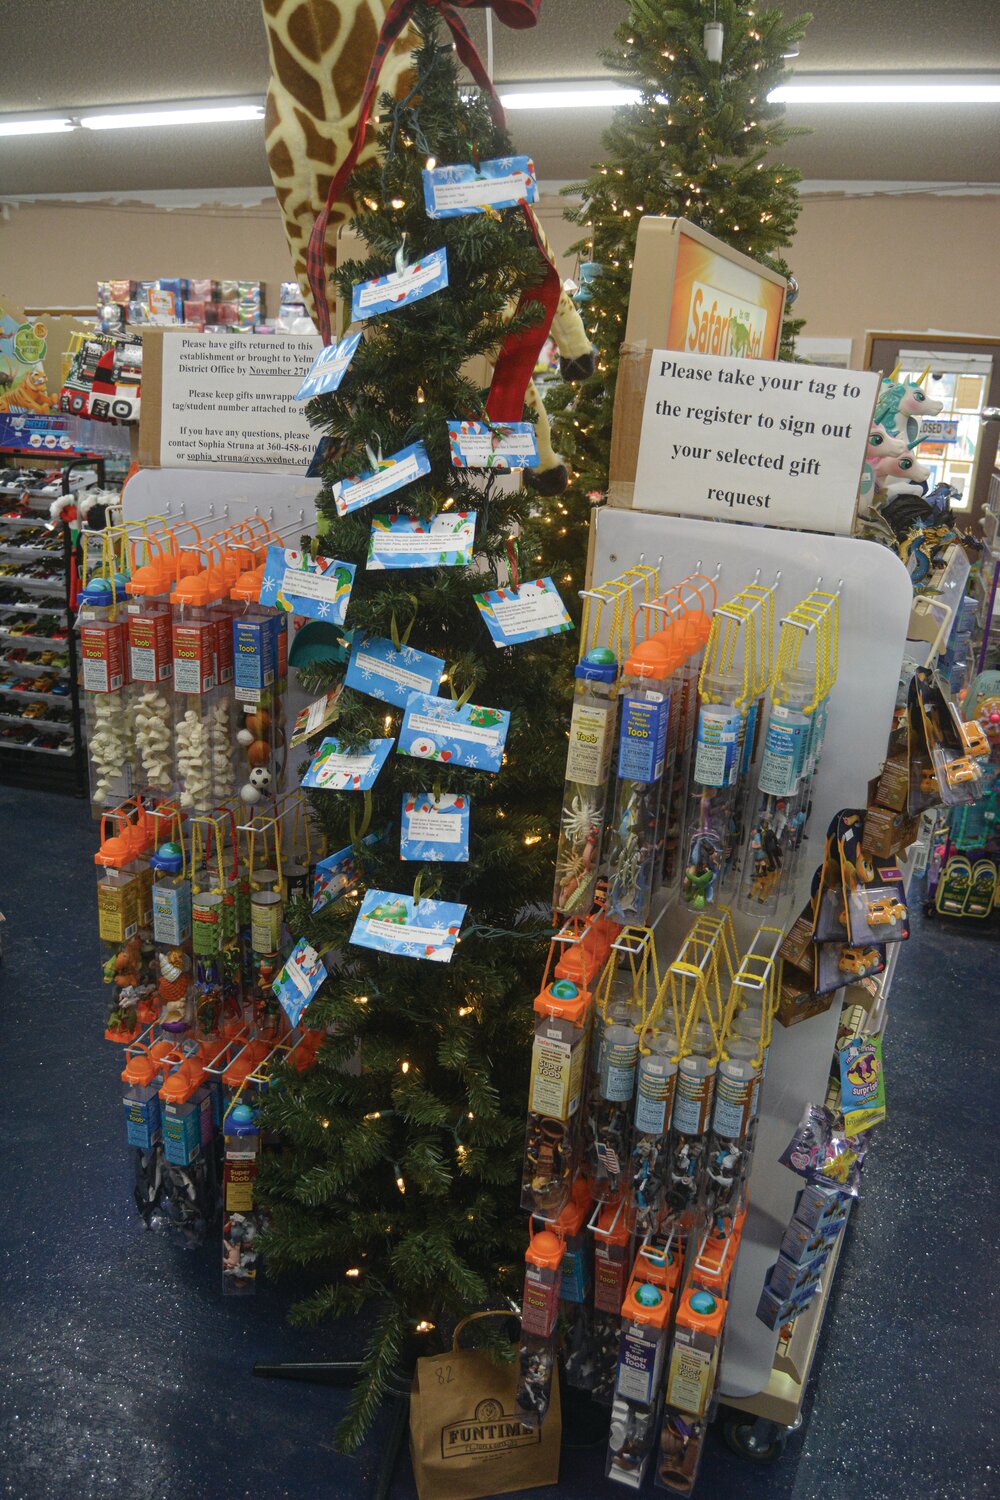 A look at the giving tree at Funtime Toys and Gifts in Yelm.